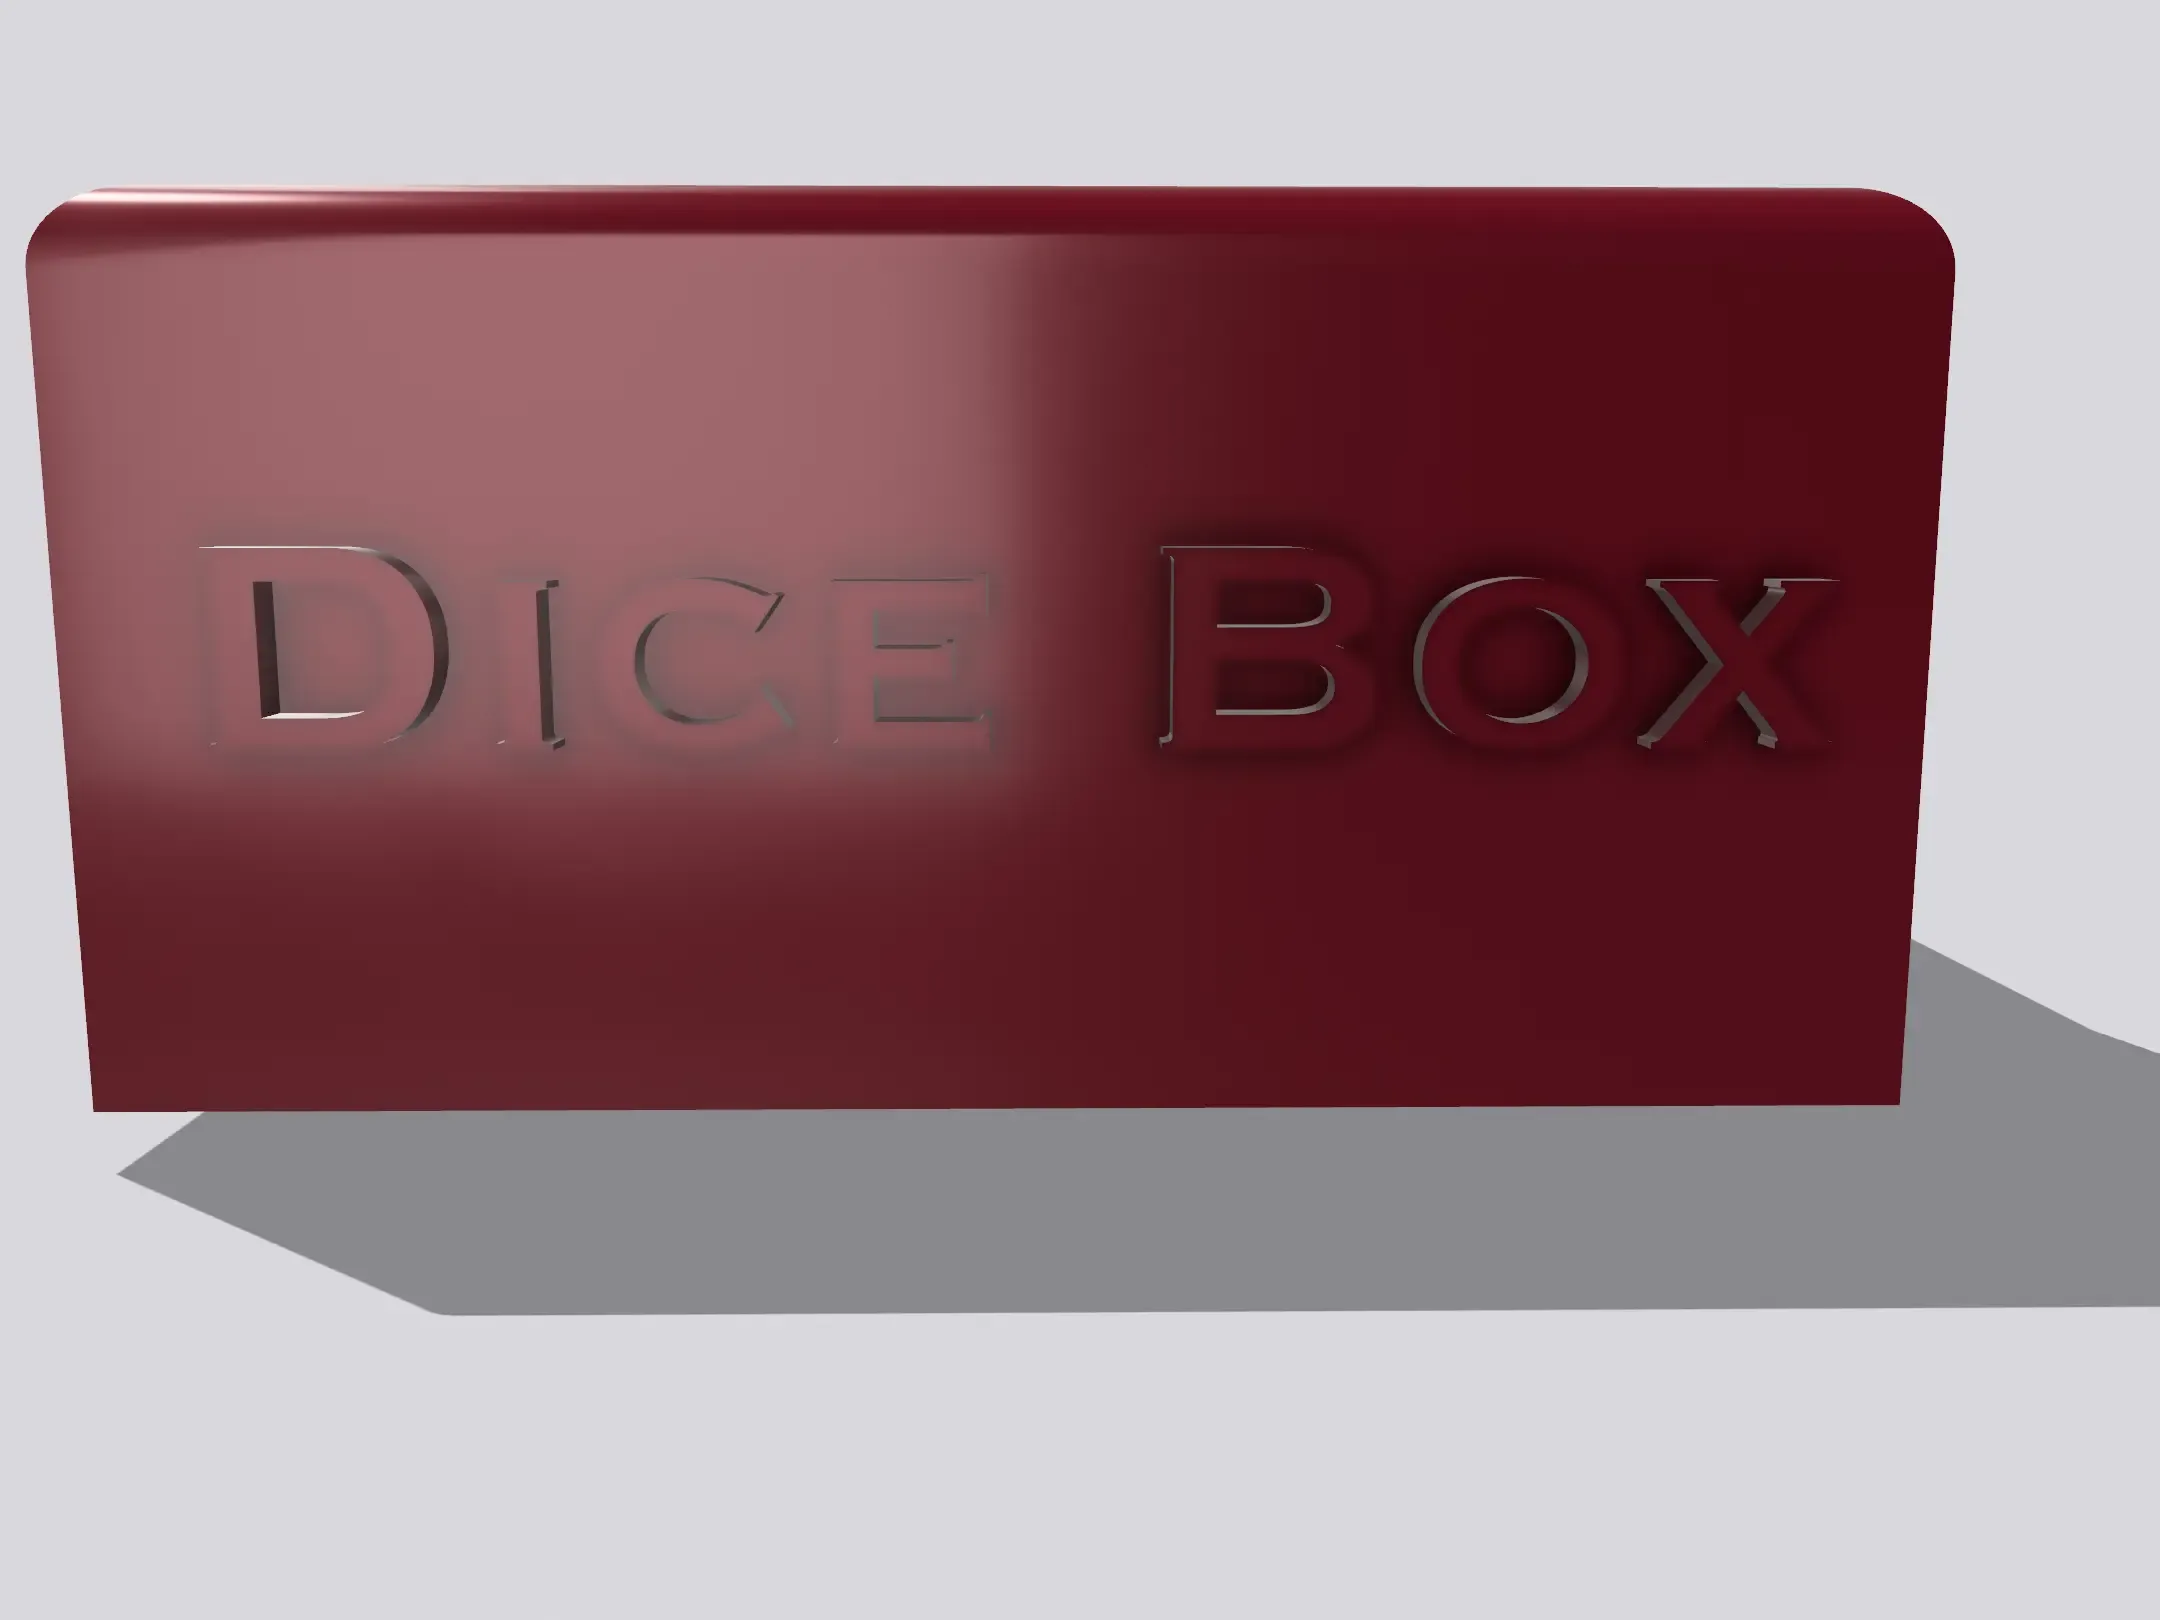 Dice Box for P&P or other Dice Games